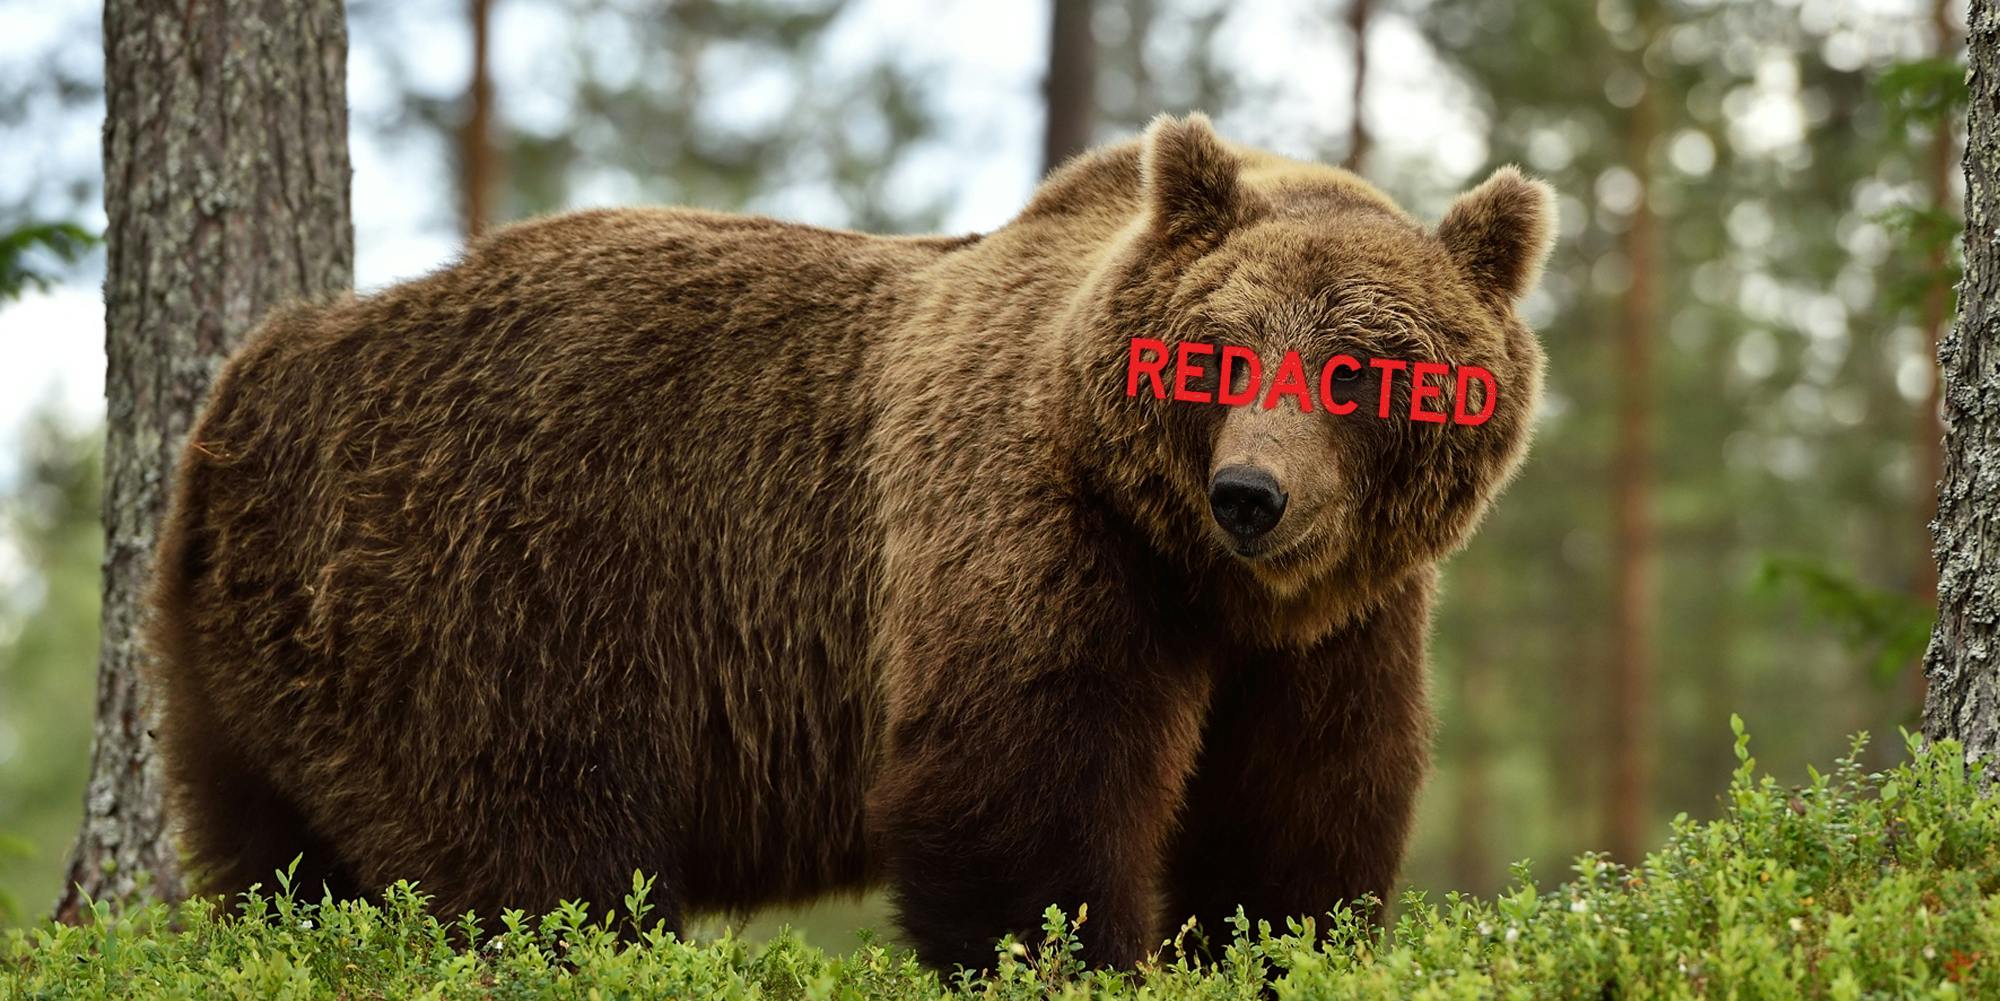 Brown bear in forest with "REDACTED" in red over eyes